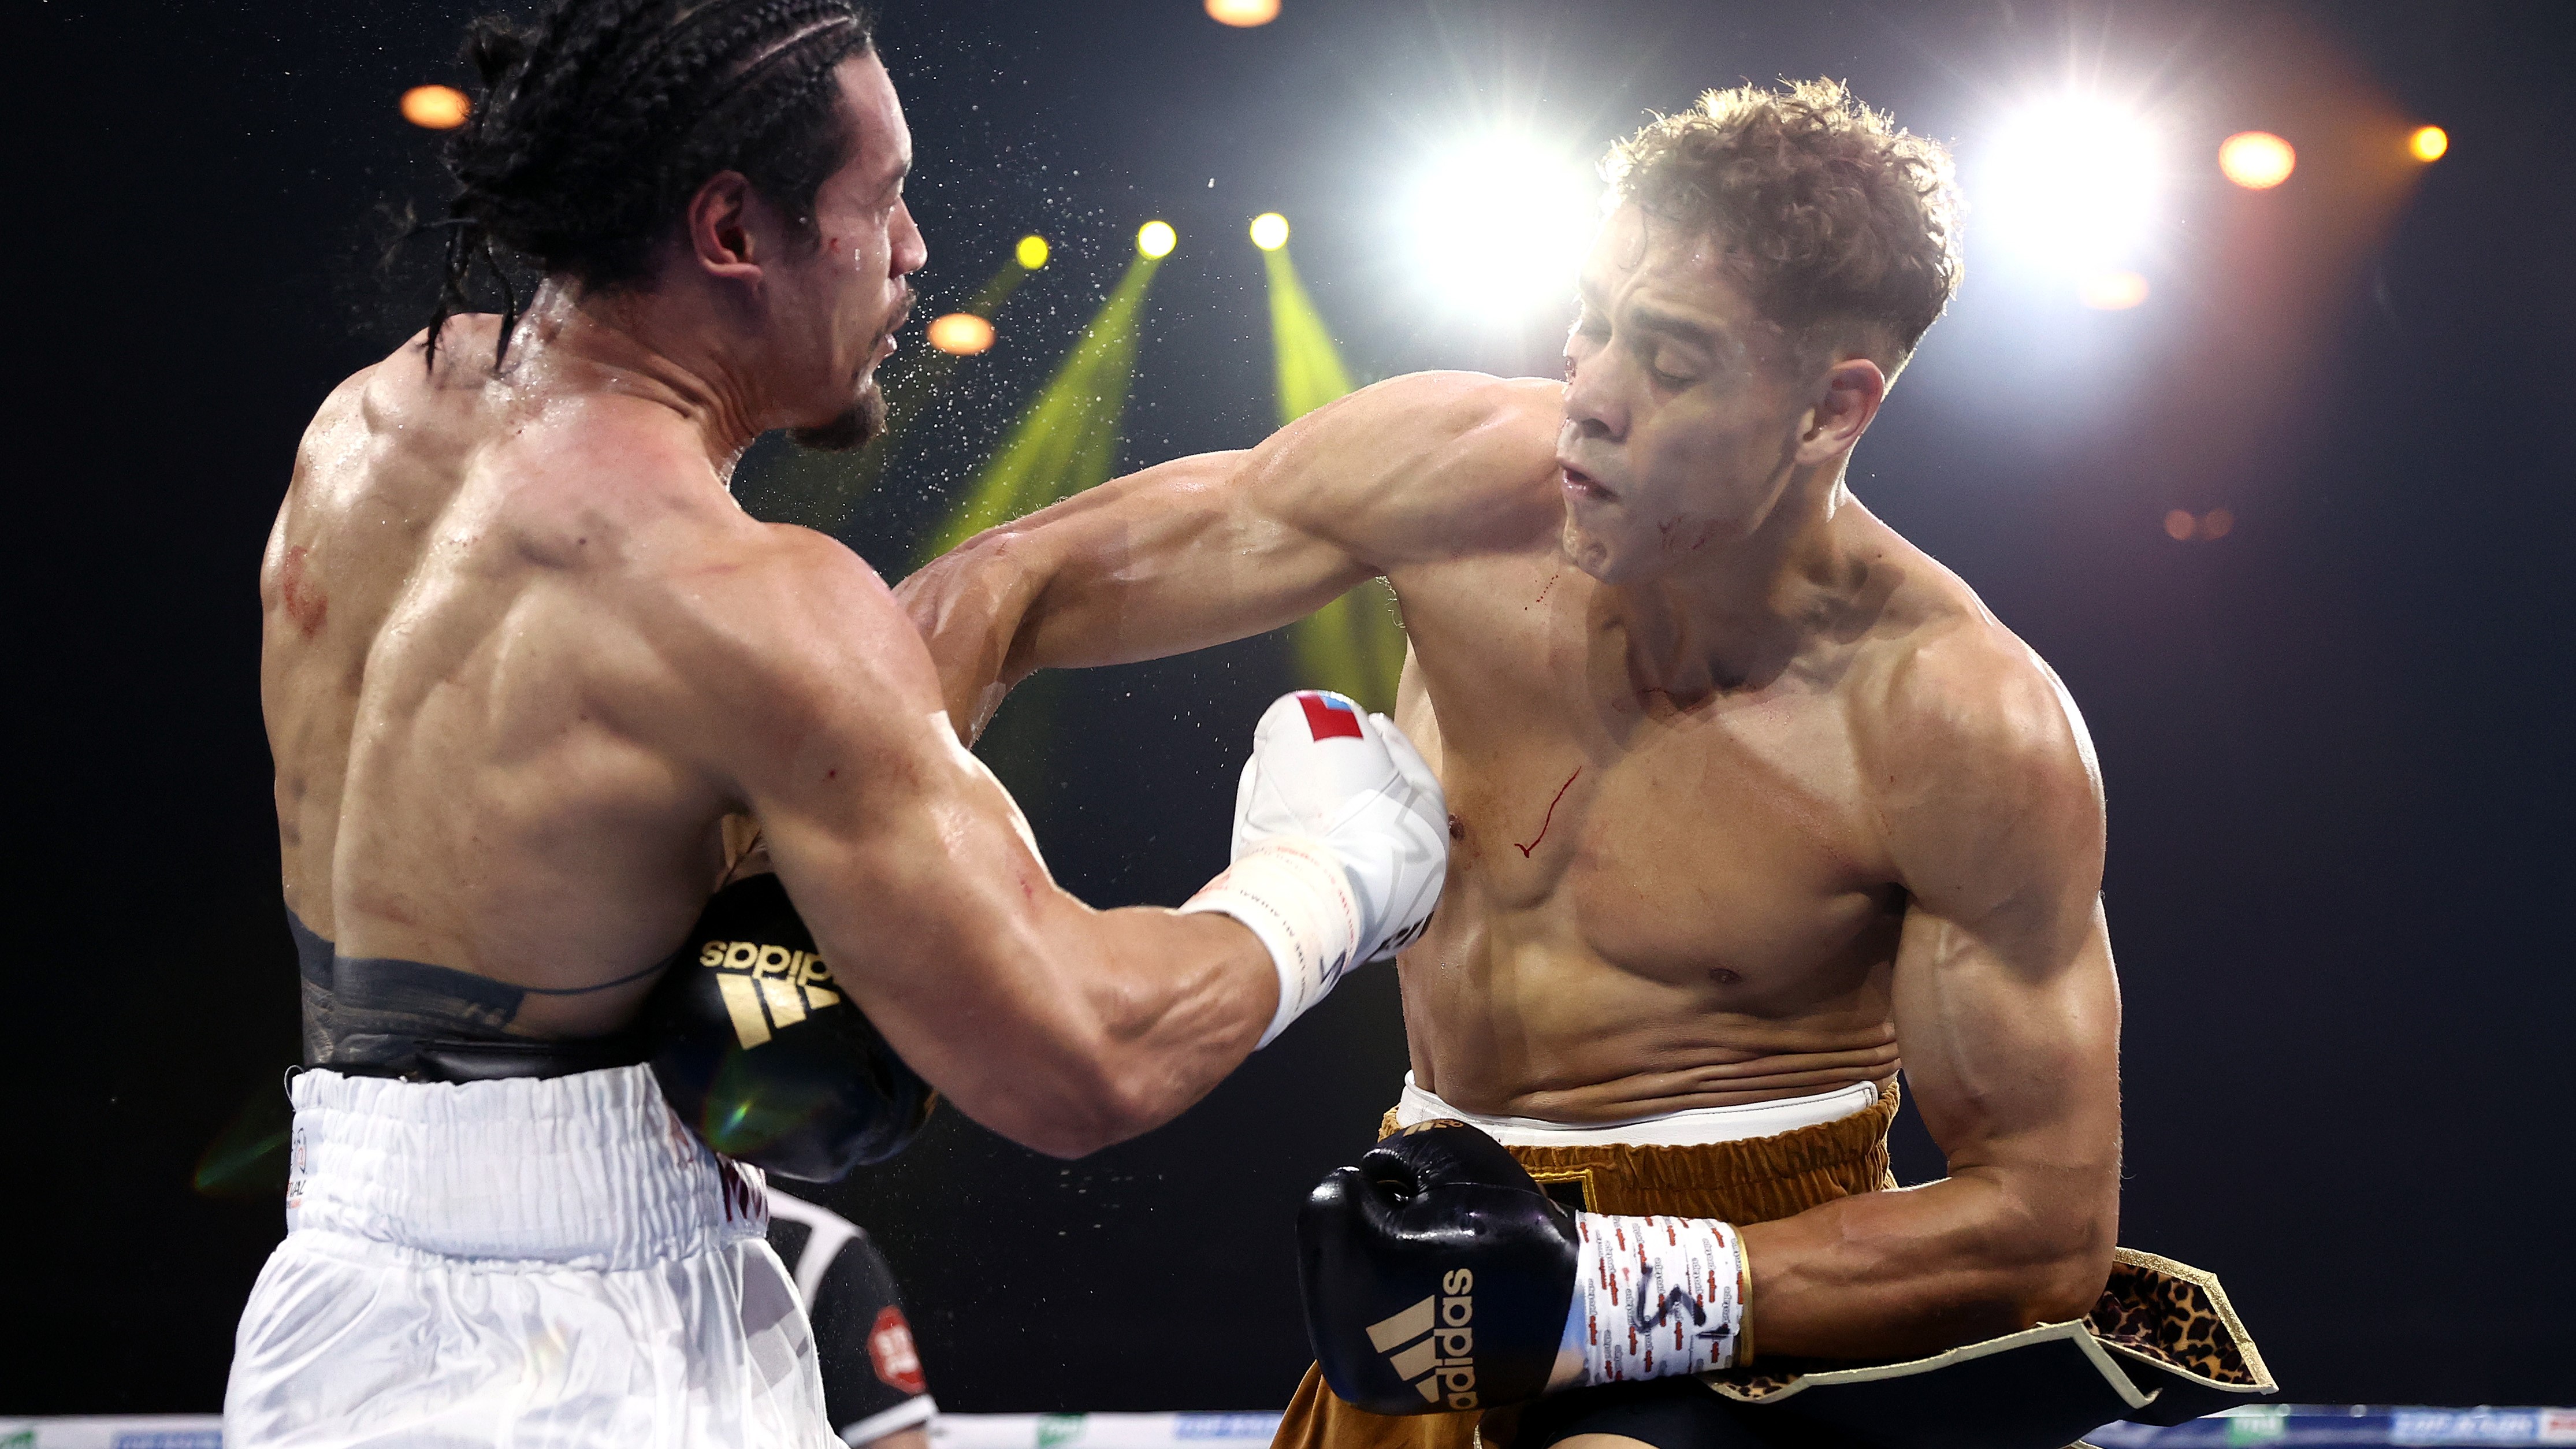 David Nyika after stunning KO win I want to fight back in picture